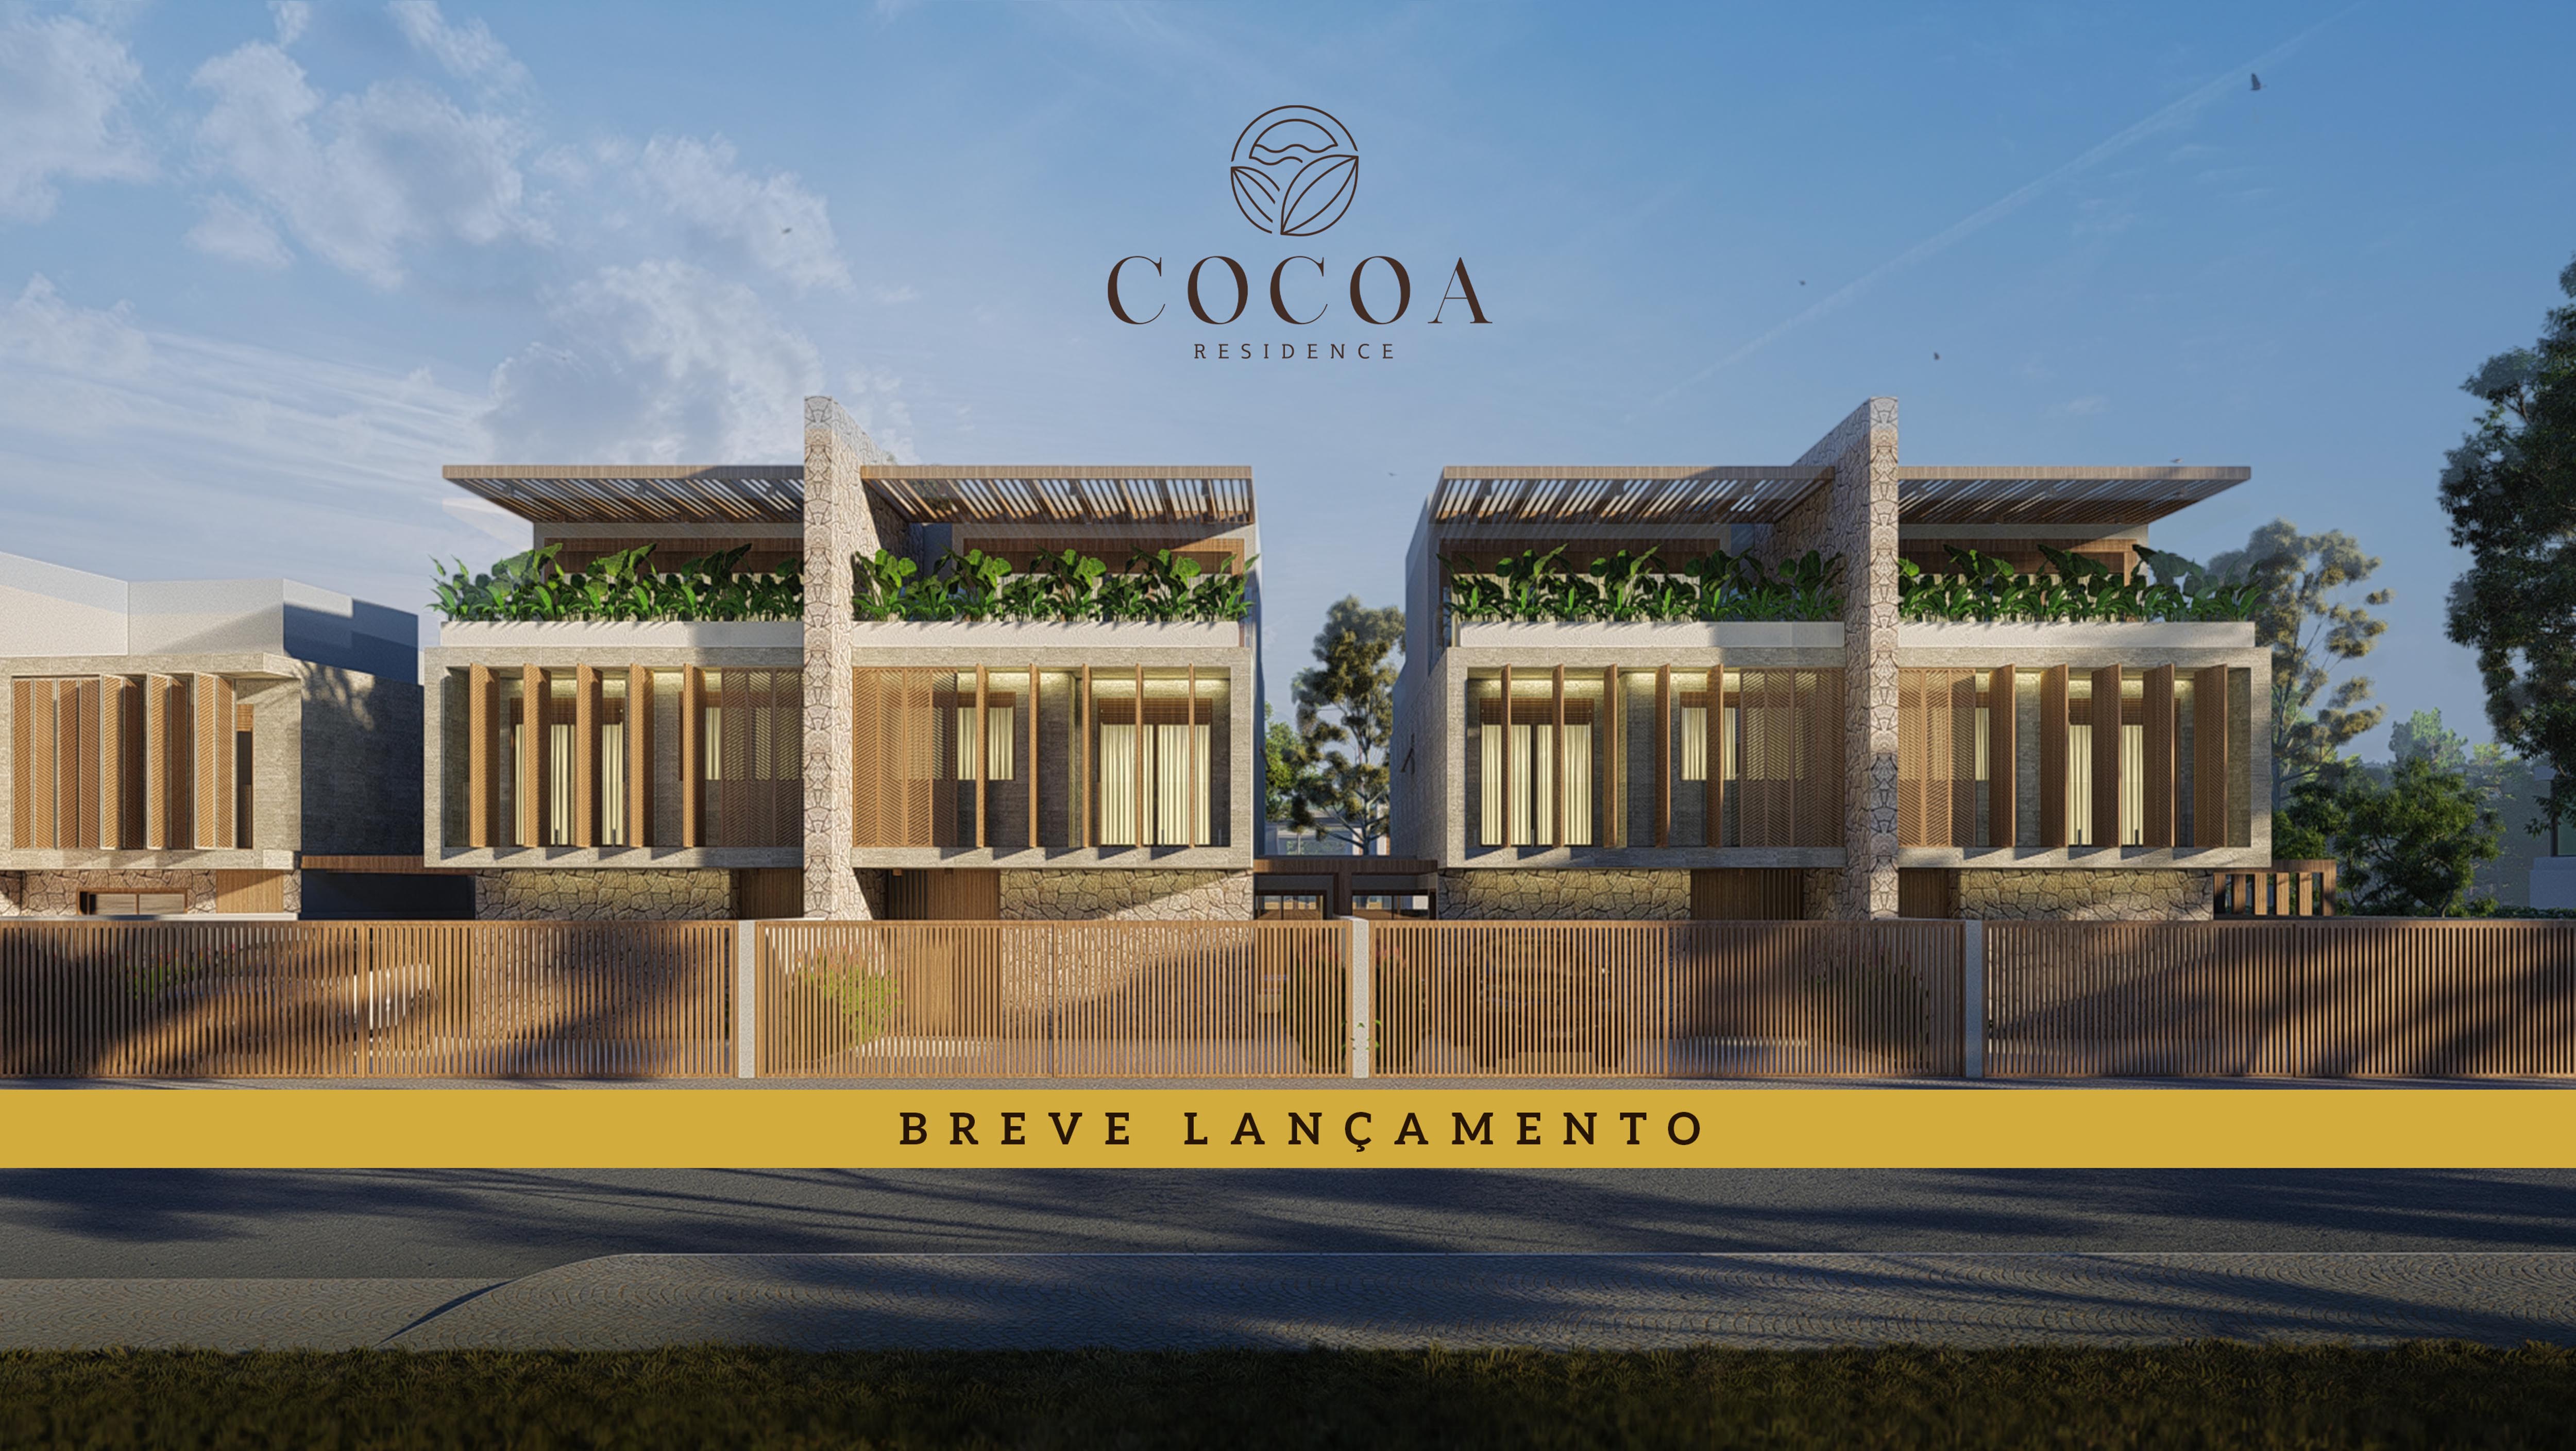 Cocoa Residence